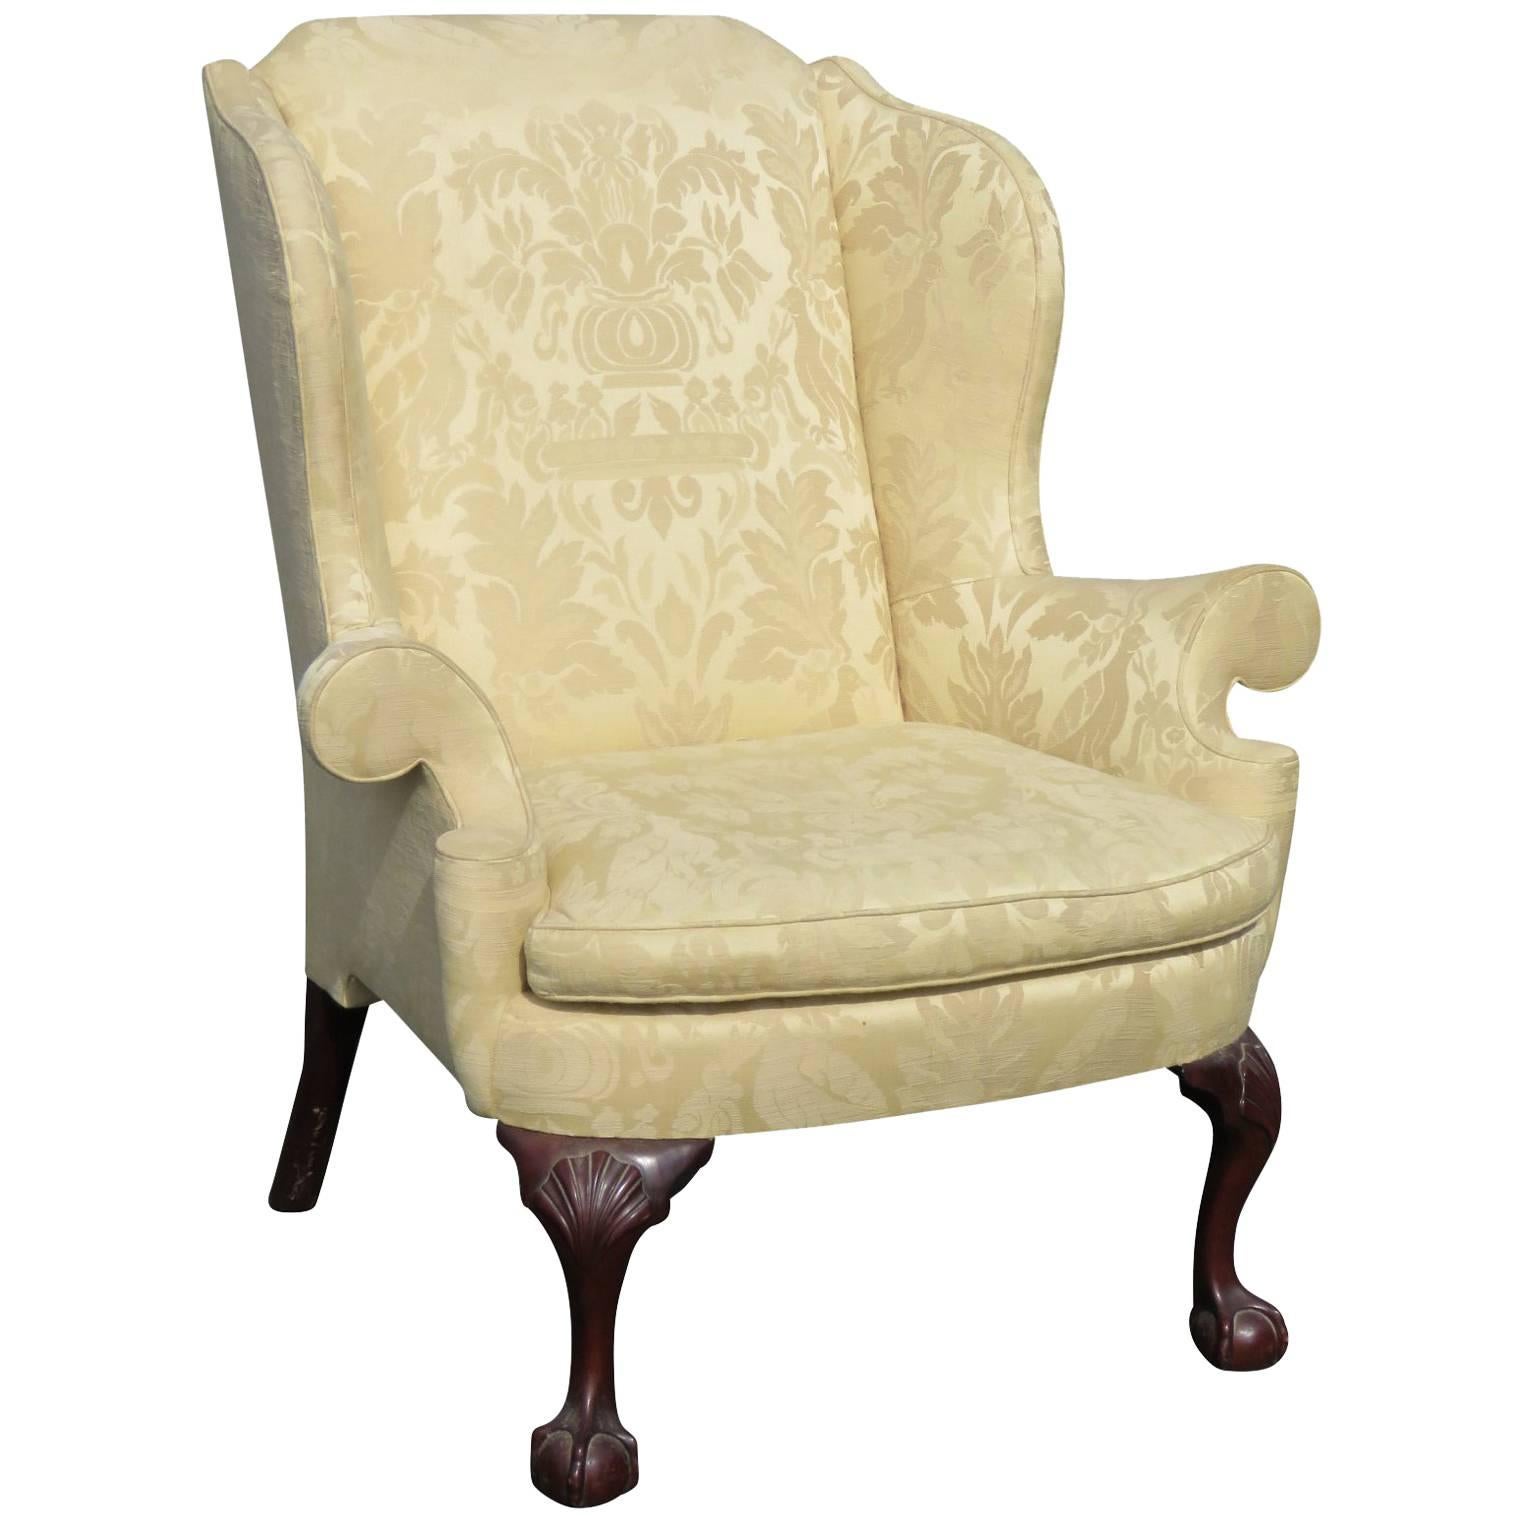 Kindel Winterthal Ball and Claw Wing Chair